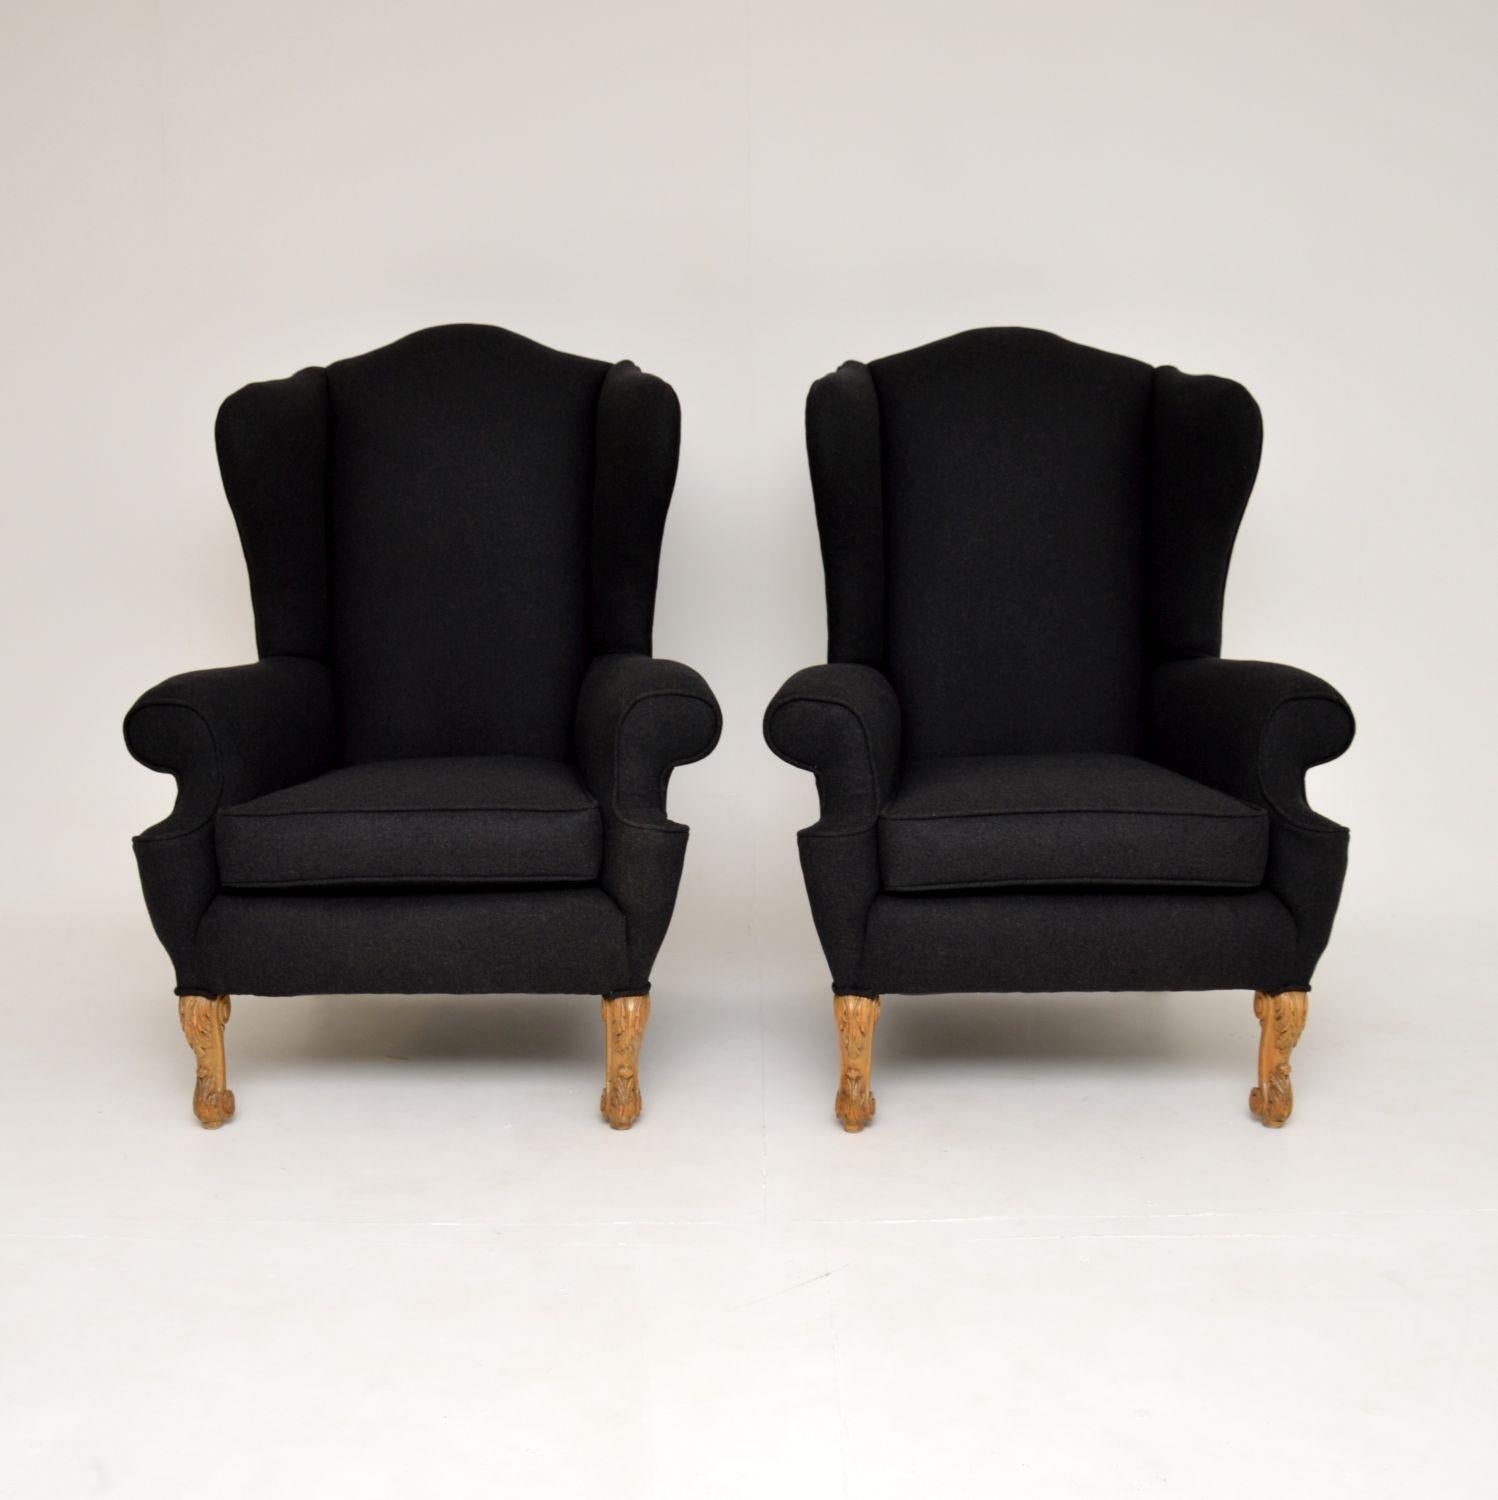 An amazing and very rare pair of antique wing back armchairs by Hille. They were made by Ray & Solomon Hille in England, and date from around the 1920’s.

The quality is fantastic, with very generous proportions, they are also extremely comfortable.